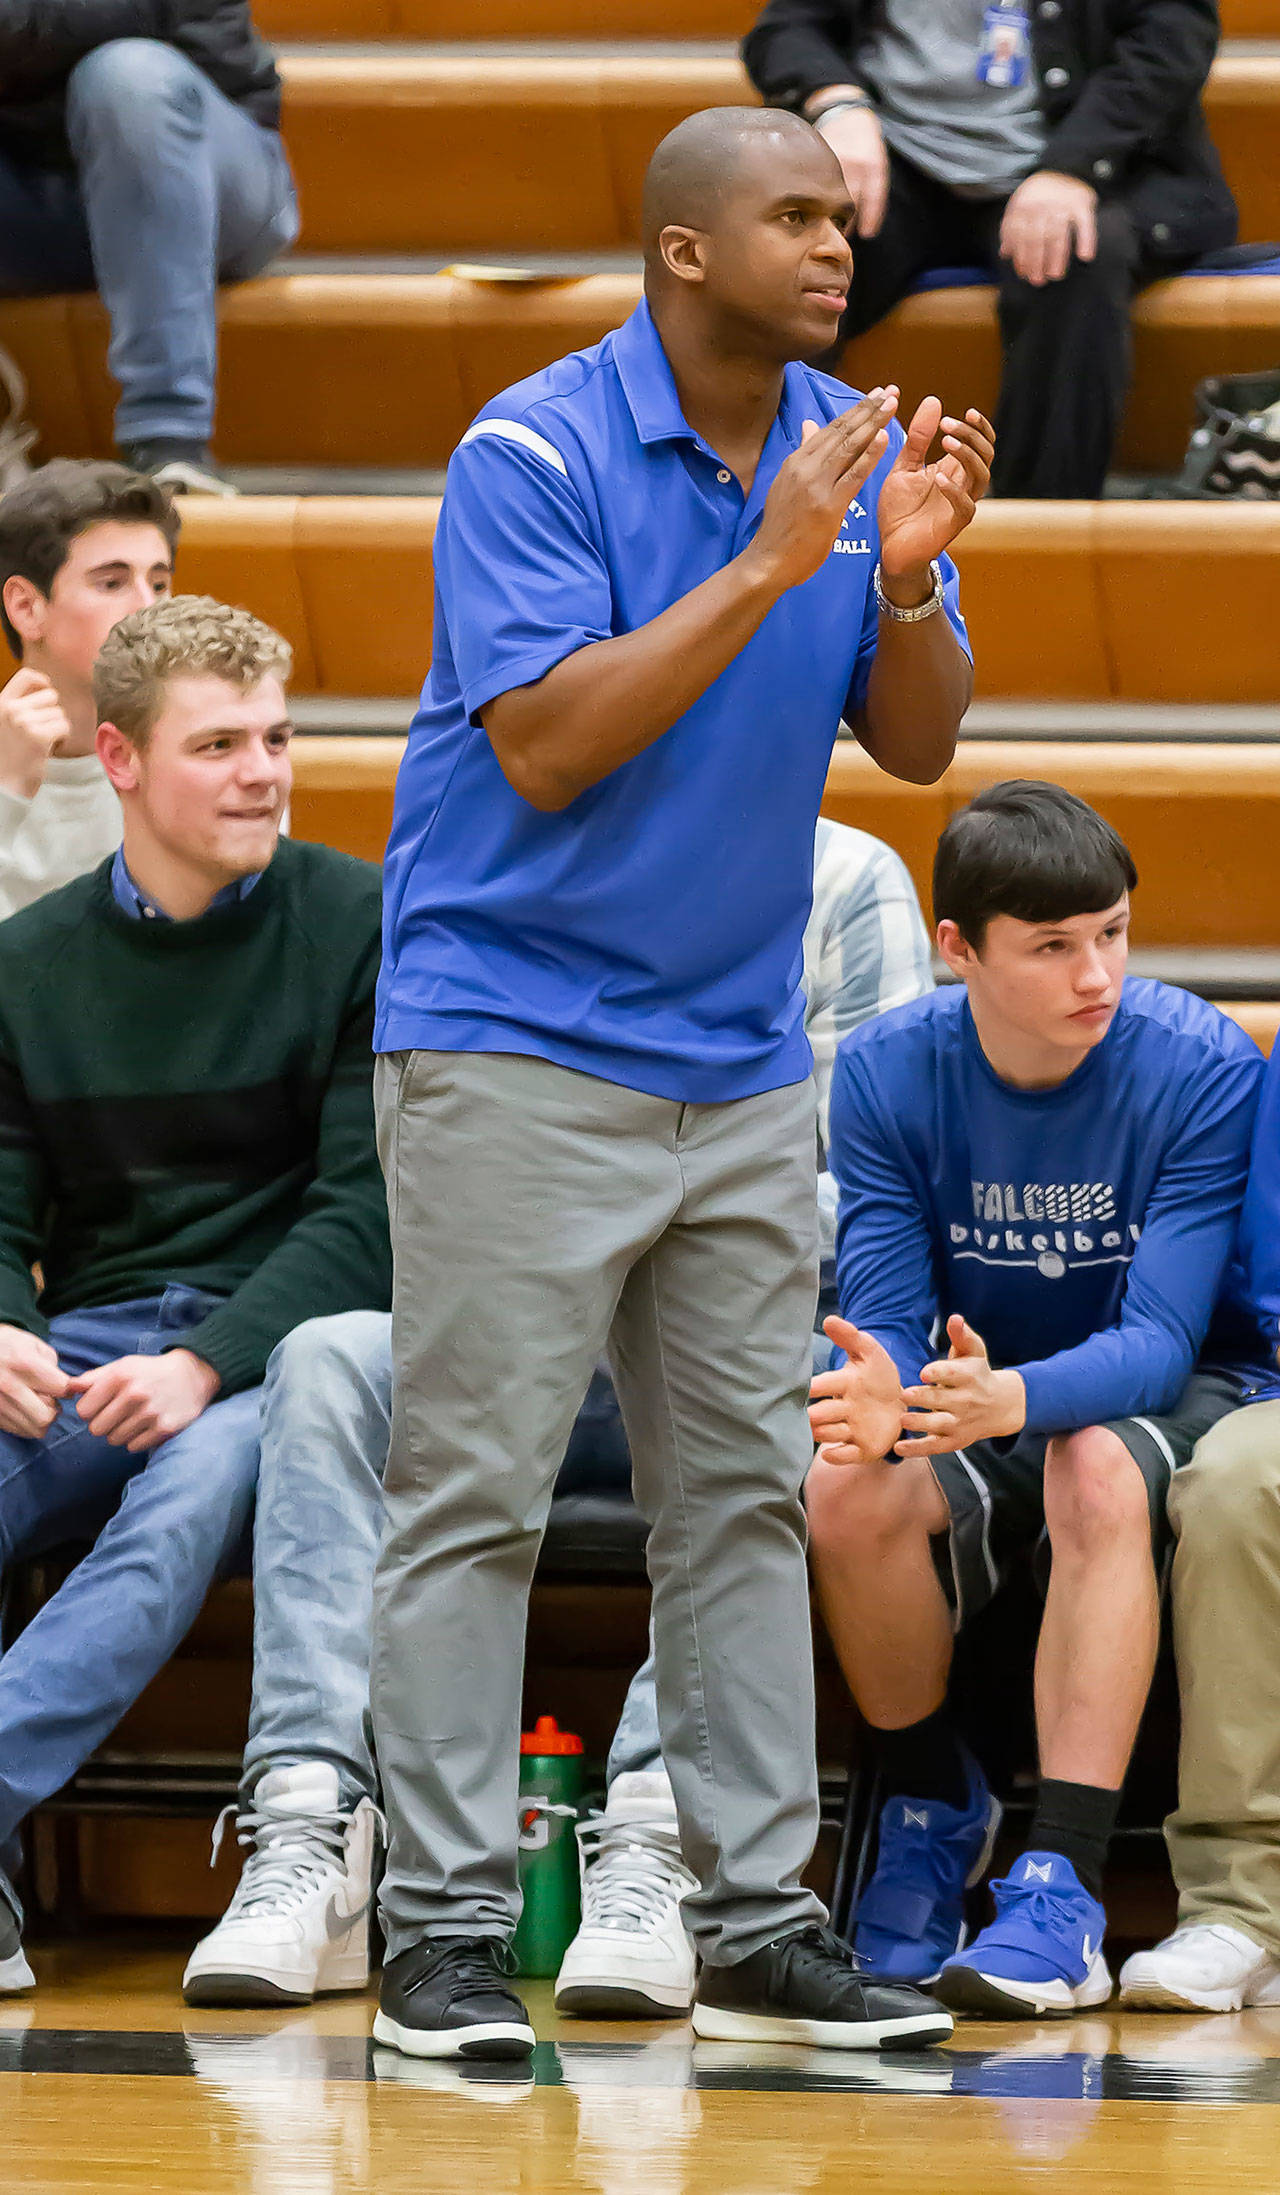 Mike Washington is stepping down after coaching the South Whidbey High School boys basketball team for five seasons. (Photo by John Fisken)